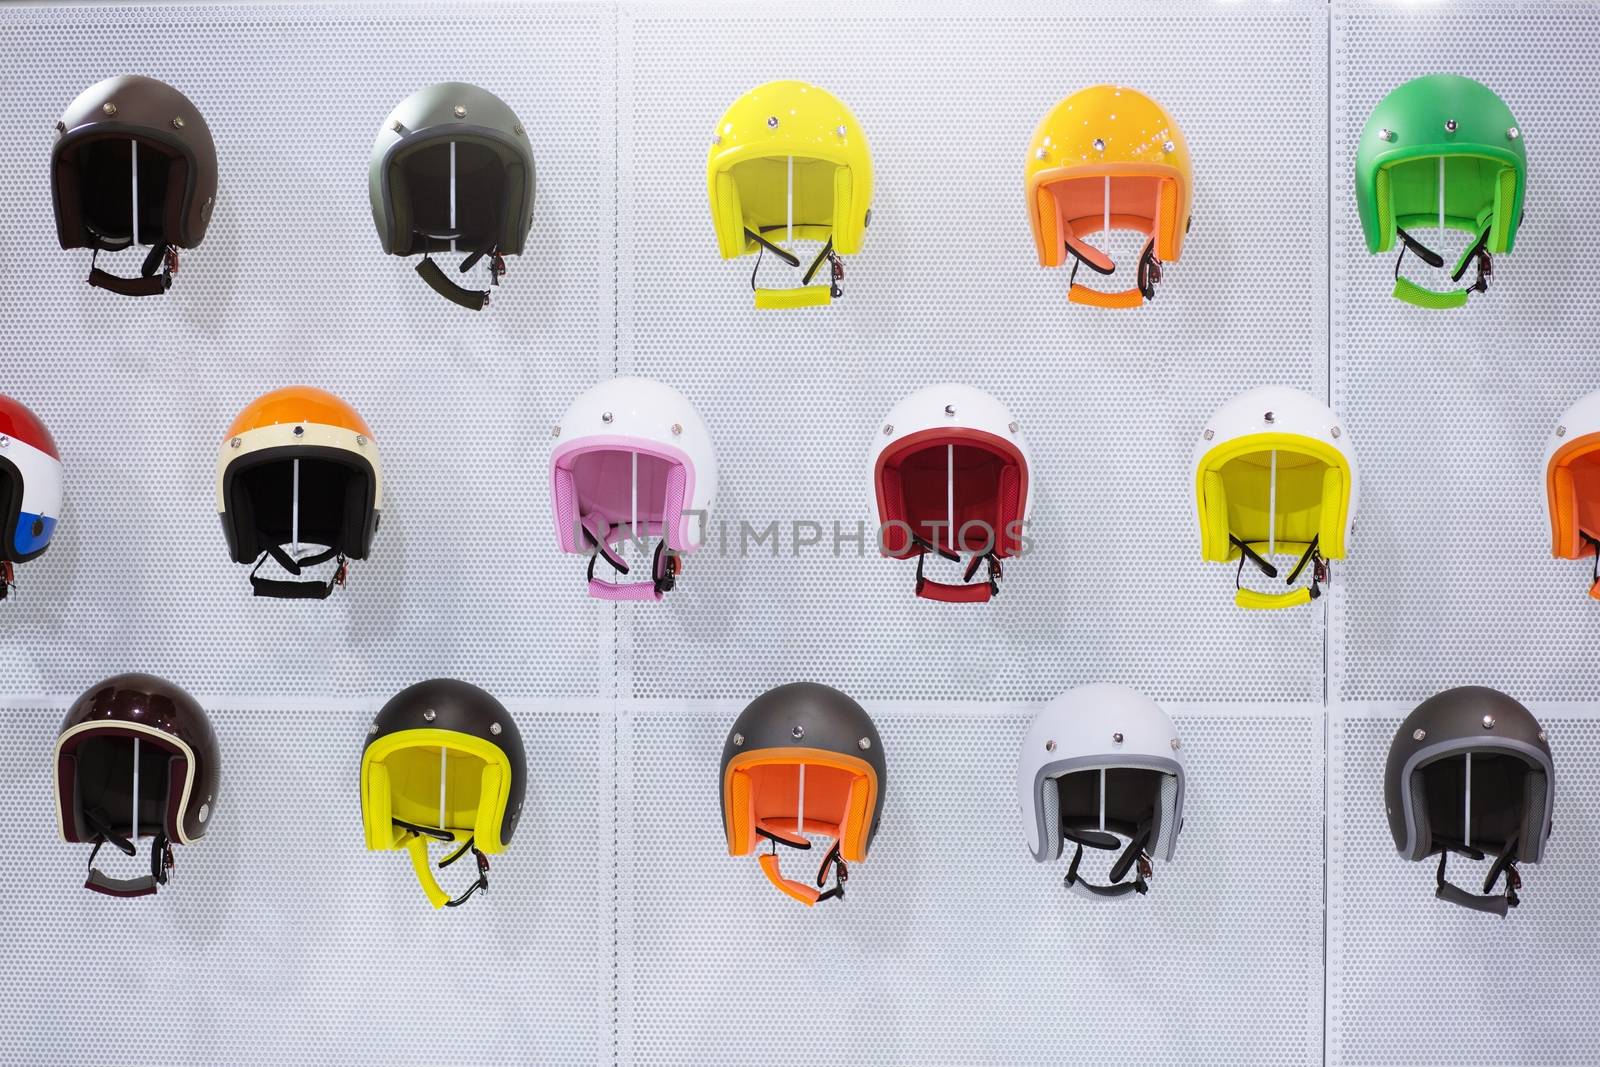 Motorcycle helmets are at the shop. by boytaro1428@gmail.com